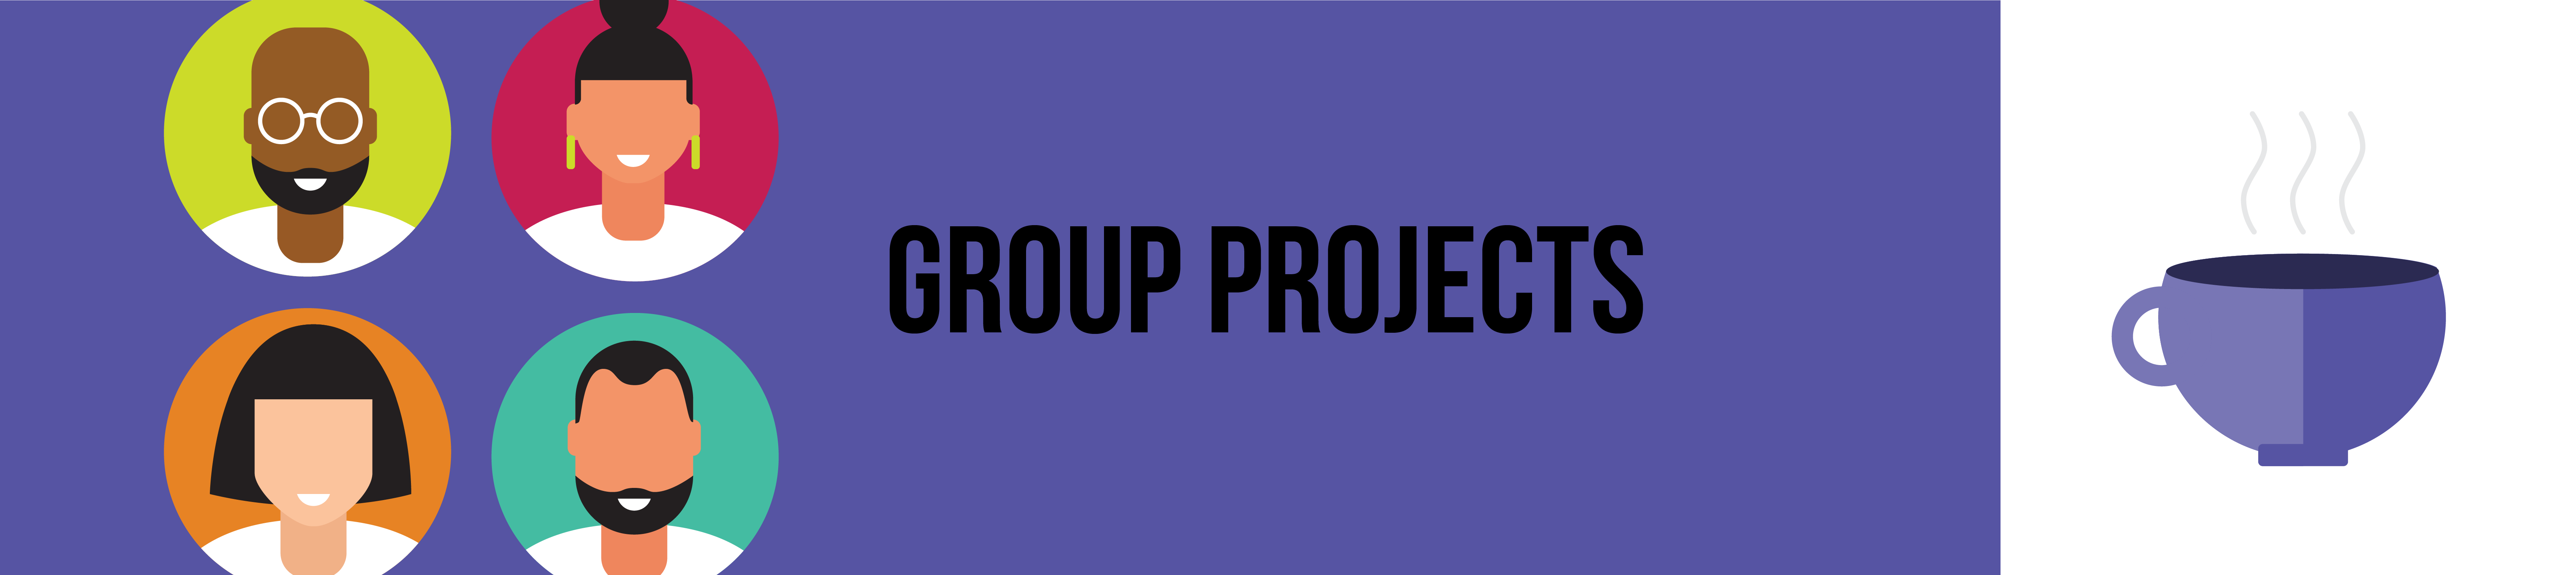 Group projects title graphic